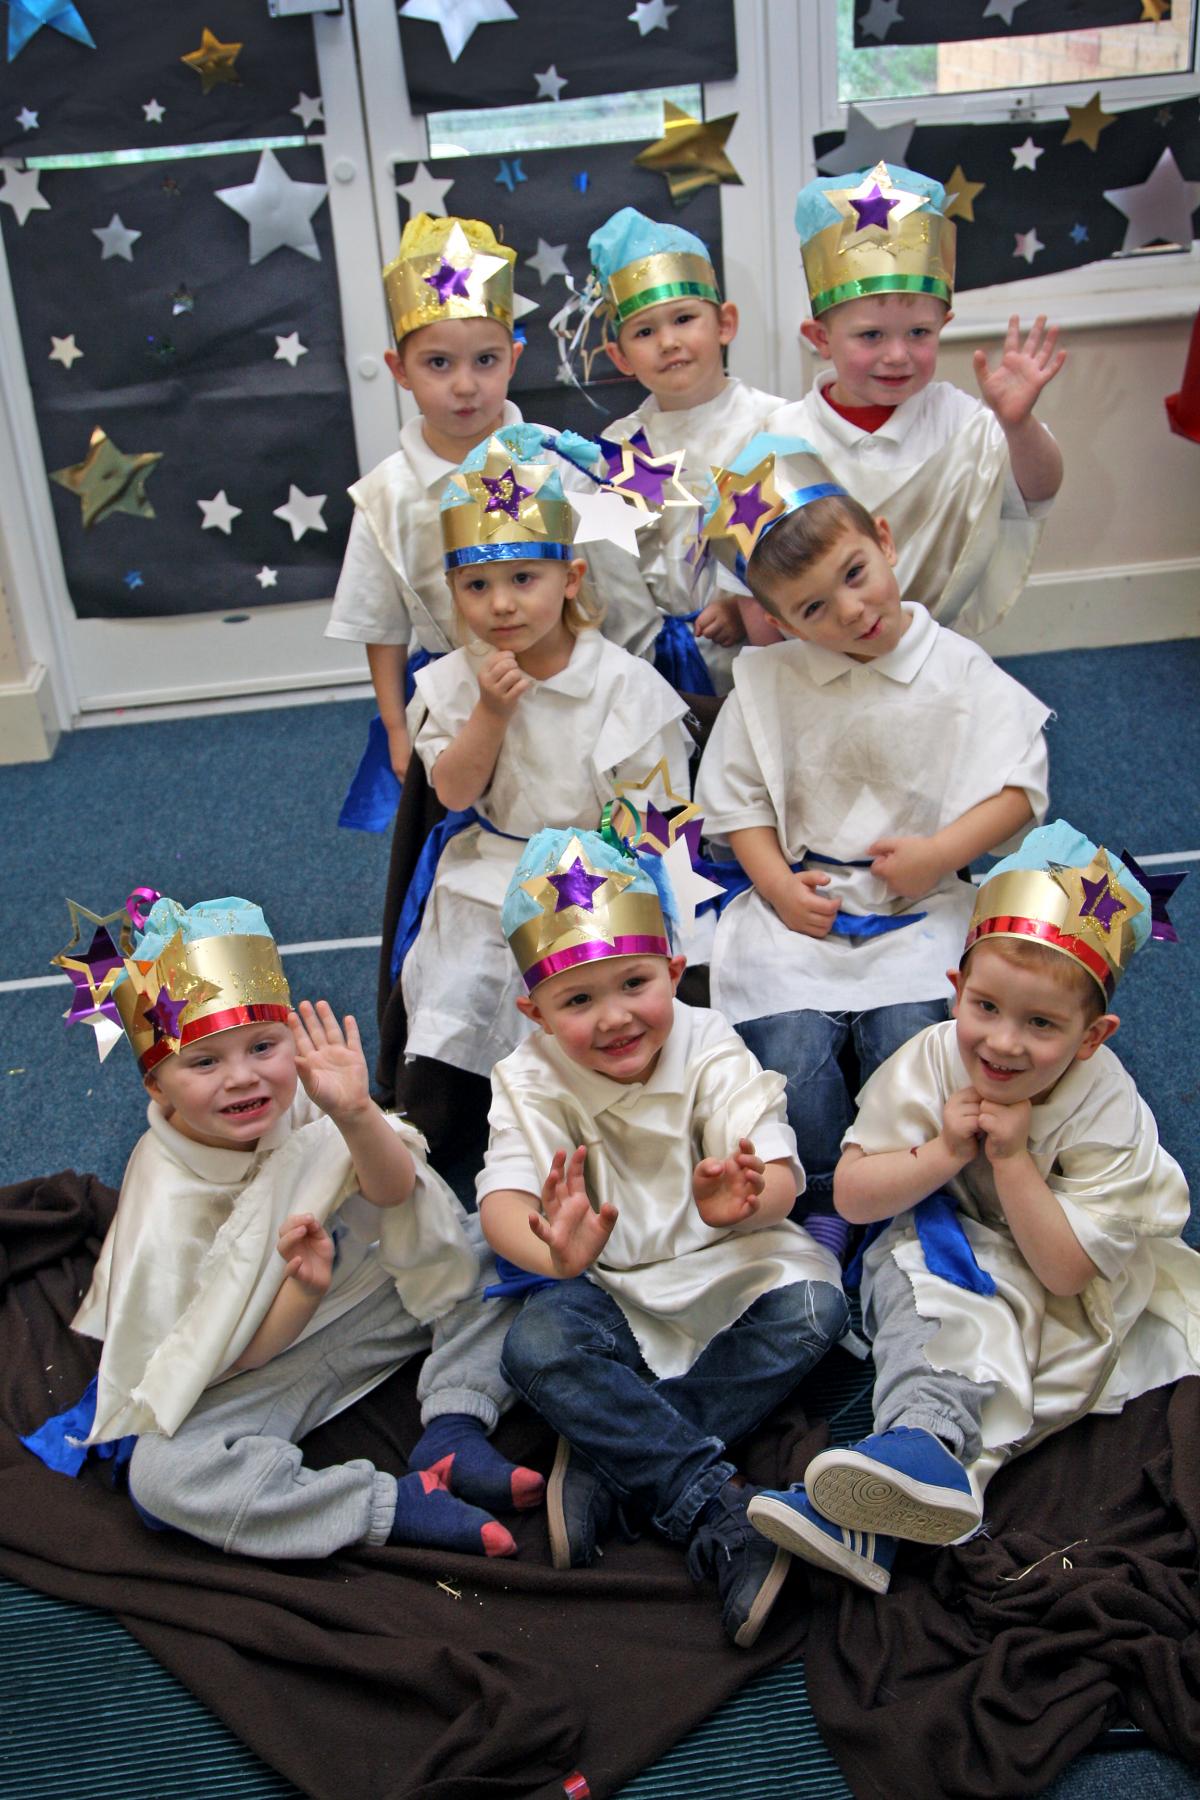 Pictures by Sally Adams Photography. 25% off nativity photo prints,  just add echosave25 at the checkout